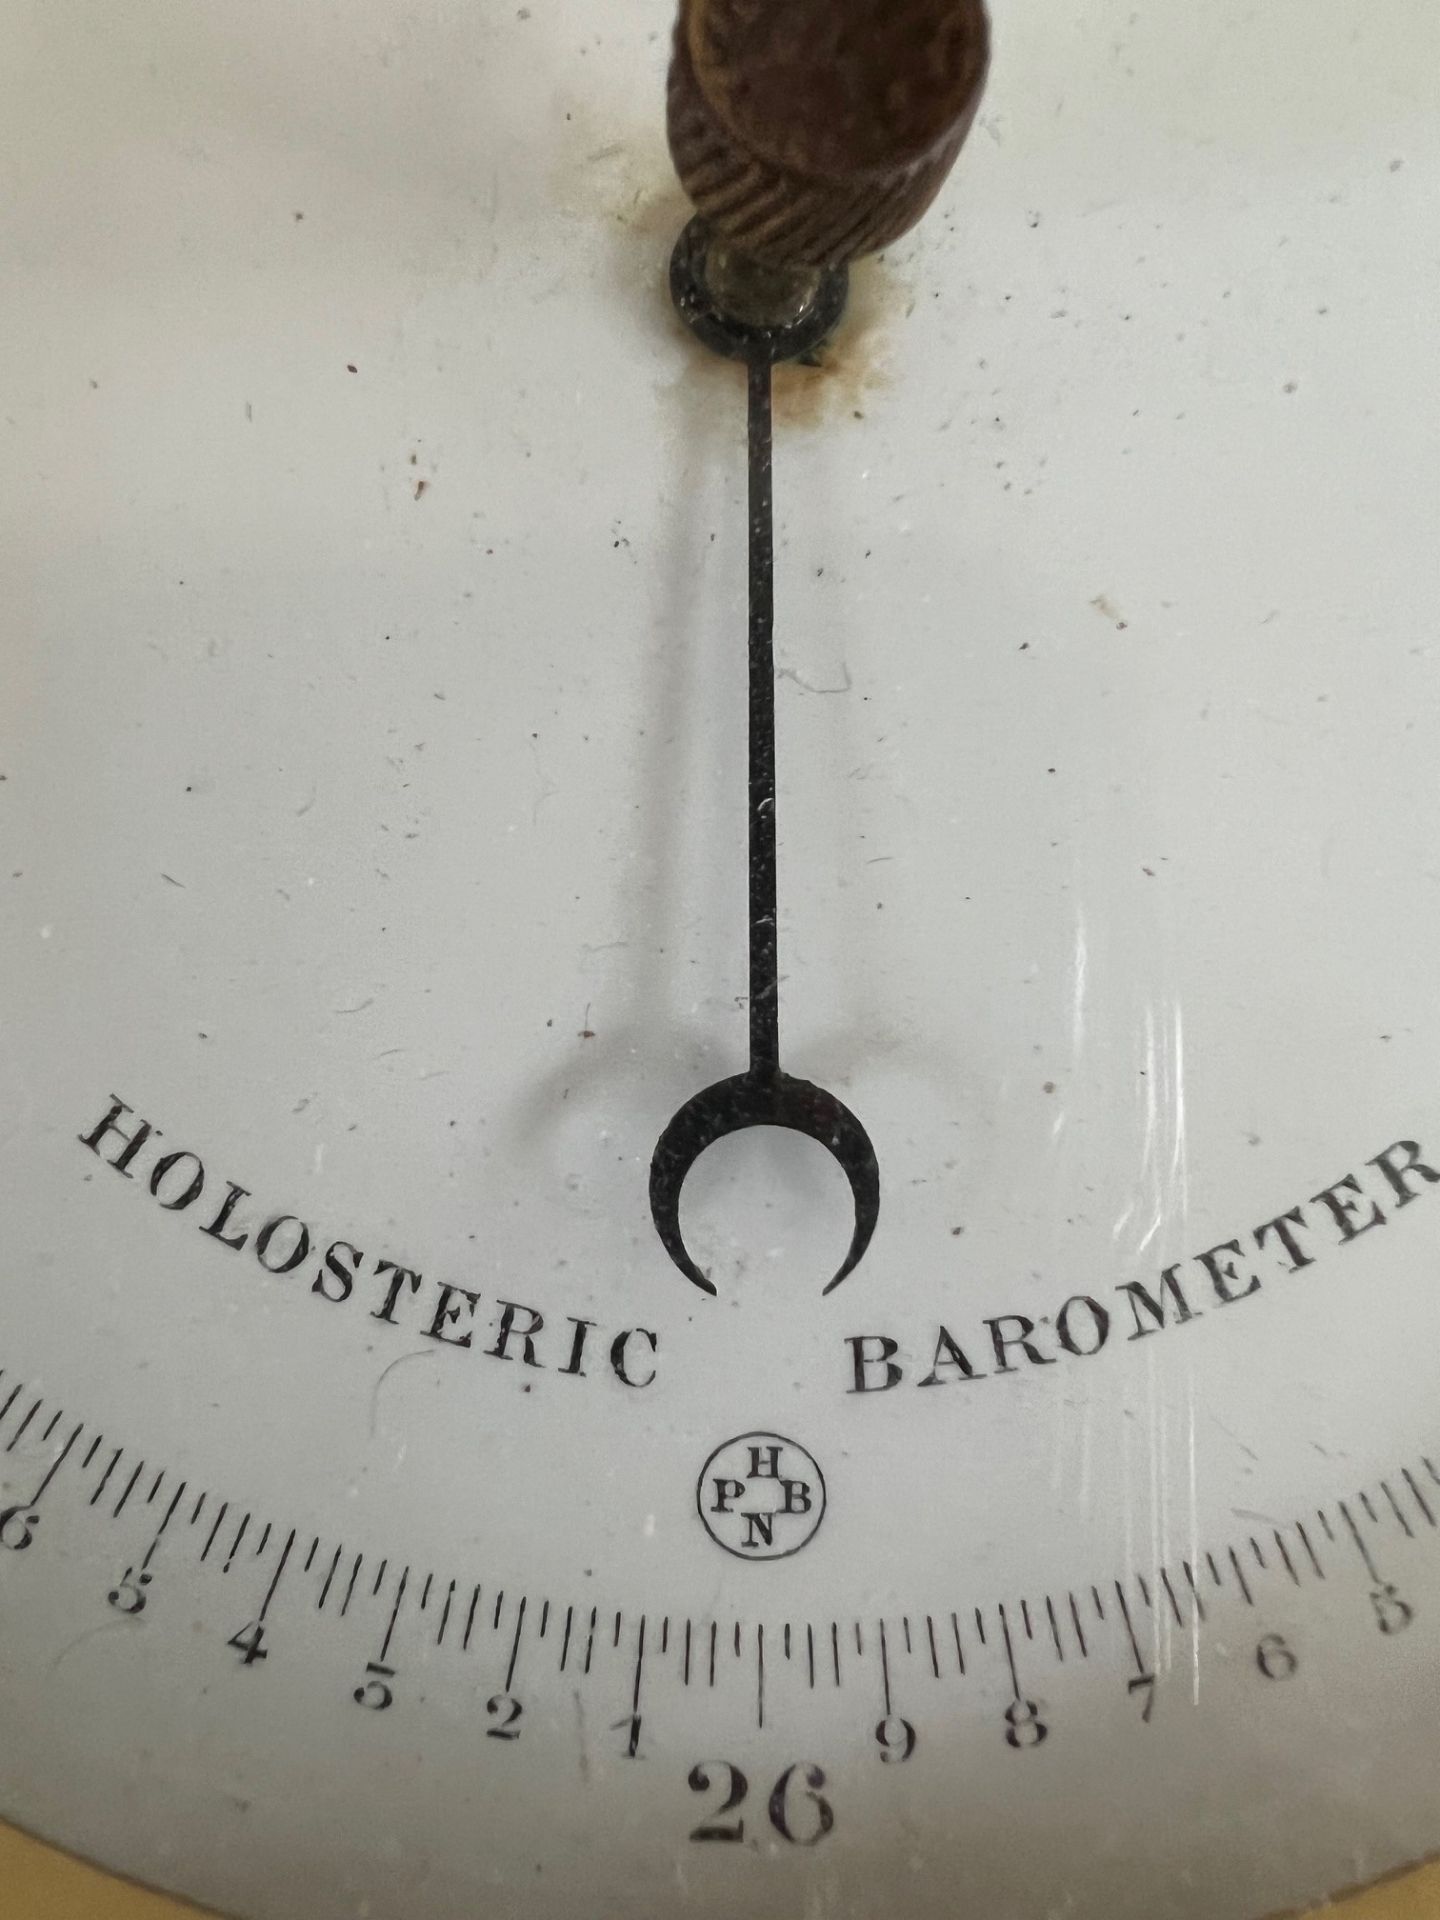 BRASS CASED HOLOSTERIC BAROMETER, J BROWN, 76 VINCENT ST, GLASGOW, DIAMETER APPROX 12.25cm AND DEPTH - Image 2 of 3